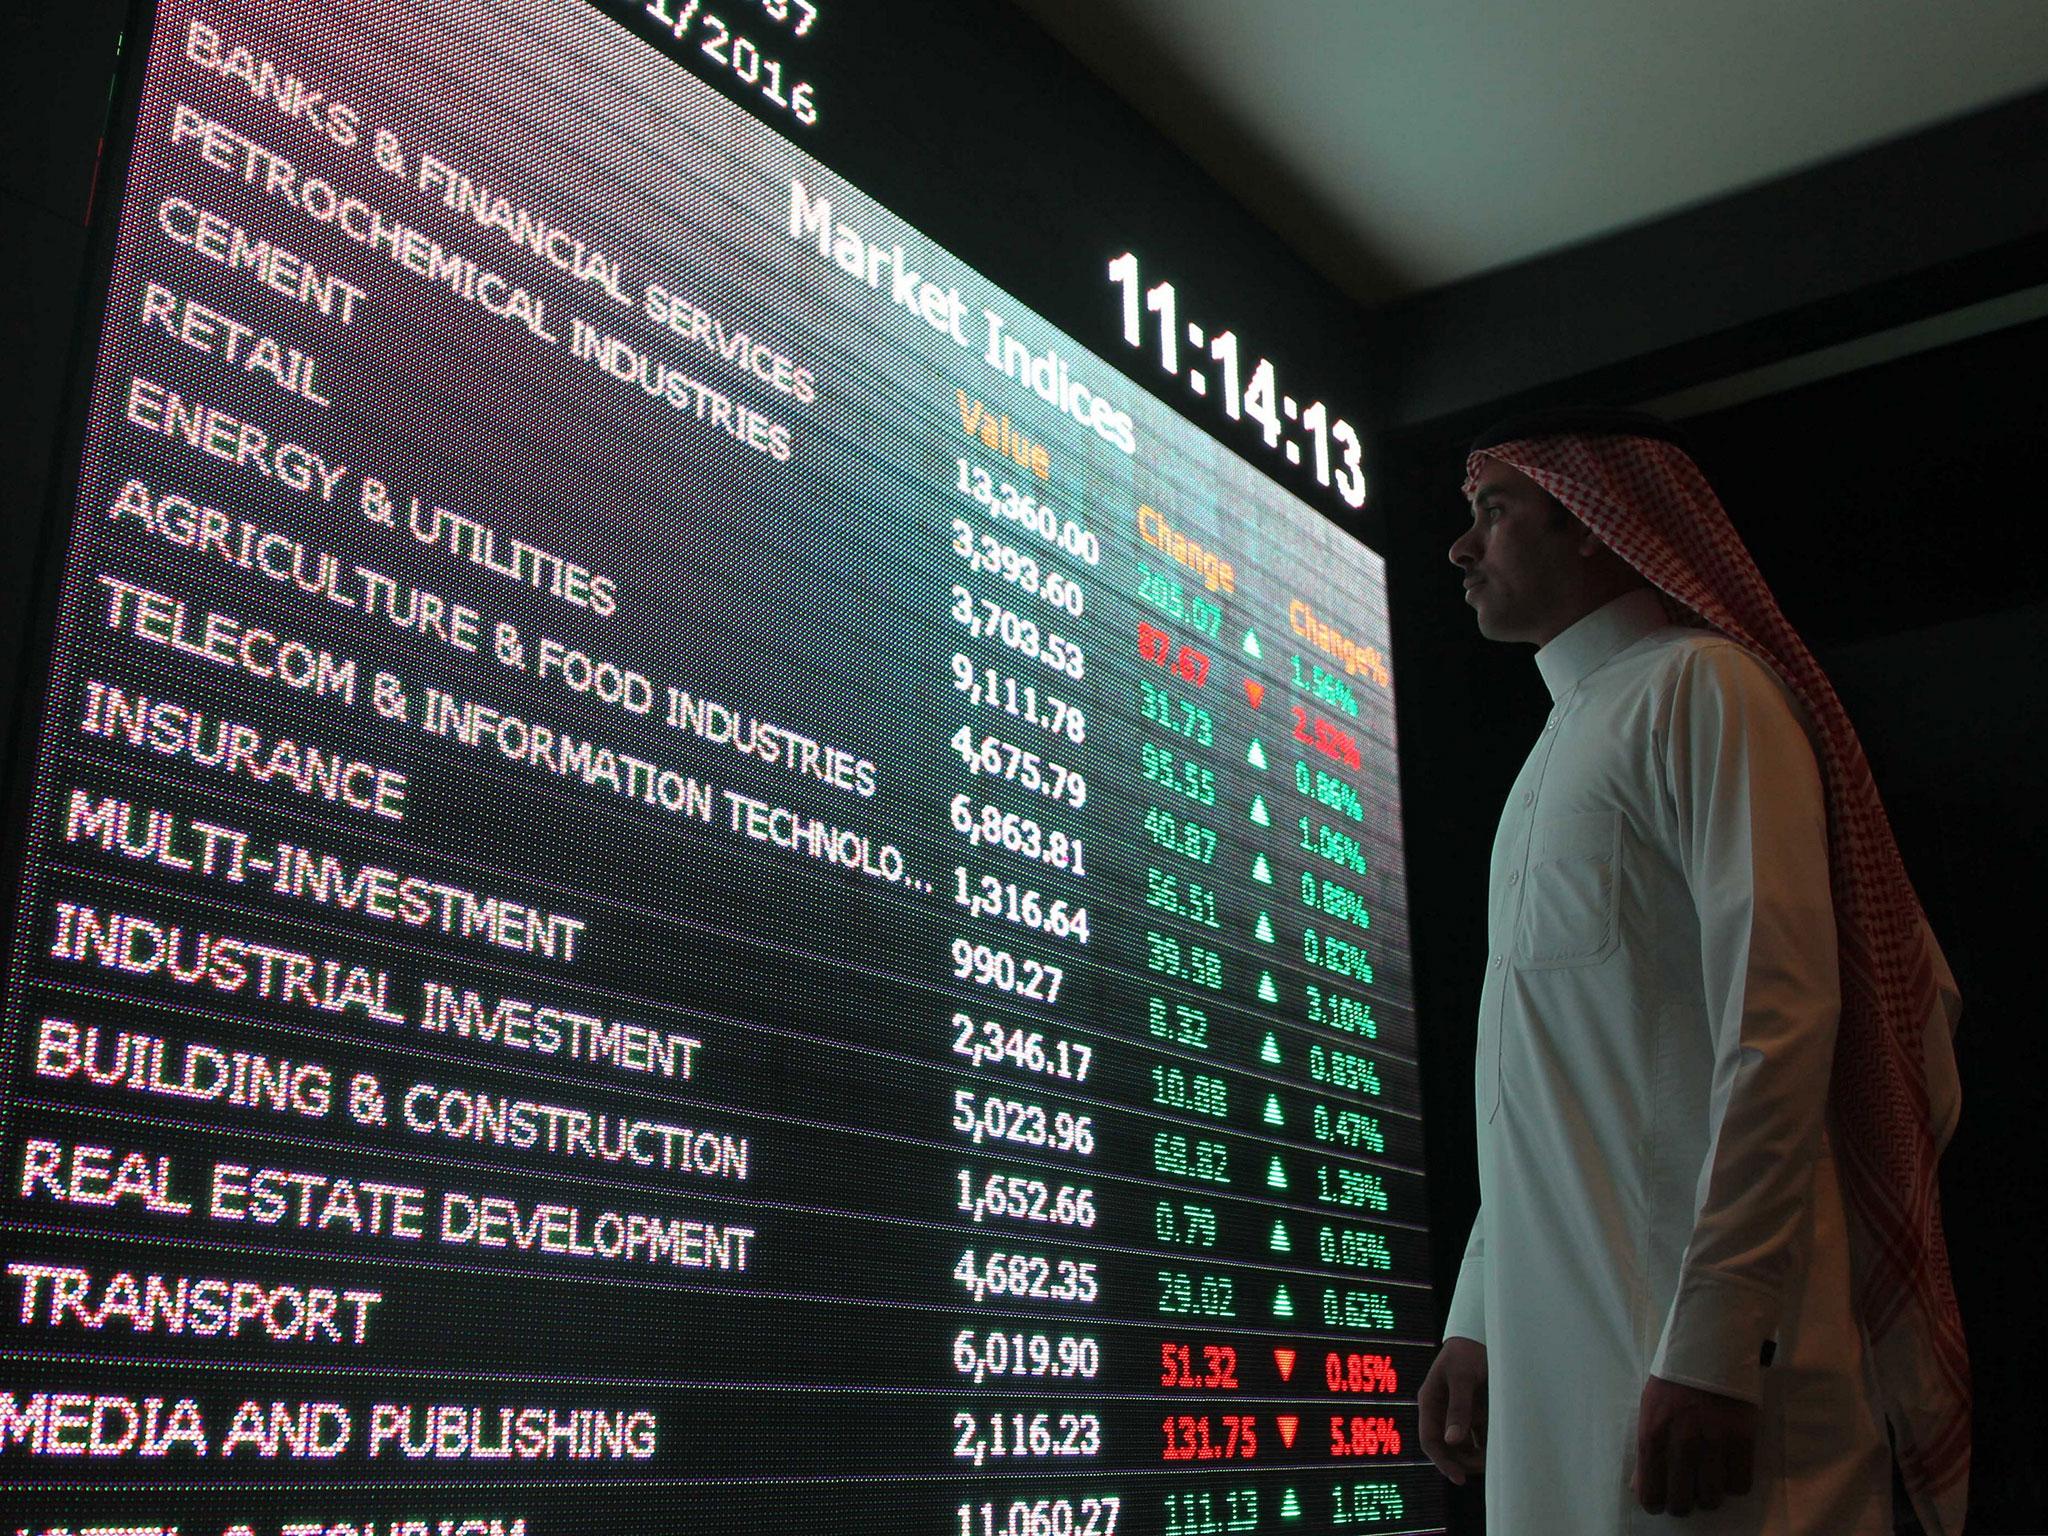 Ms Suhaimi will chair the Arab world's largest stock exchange at a critical time